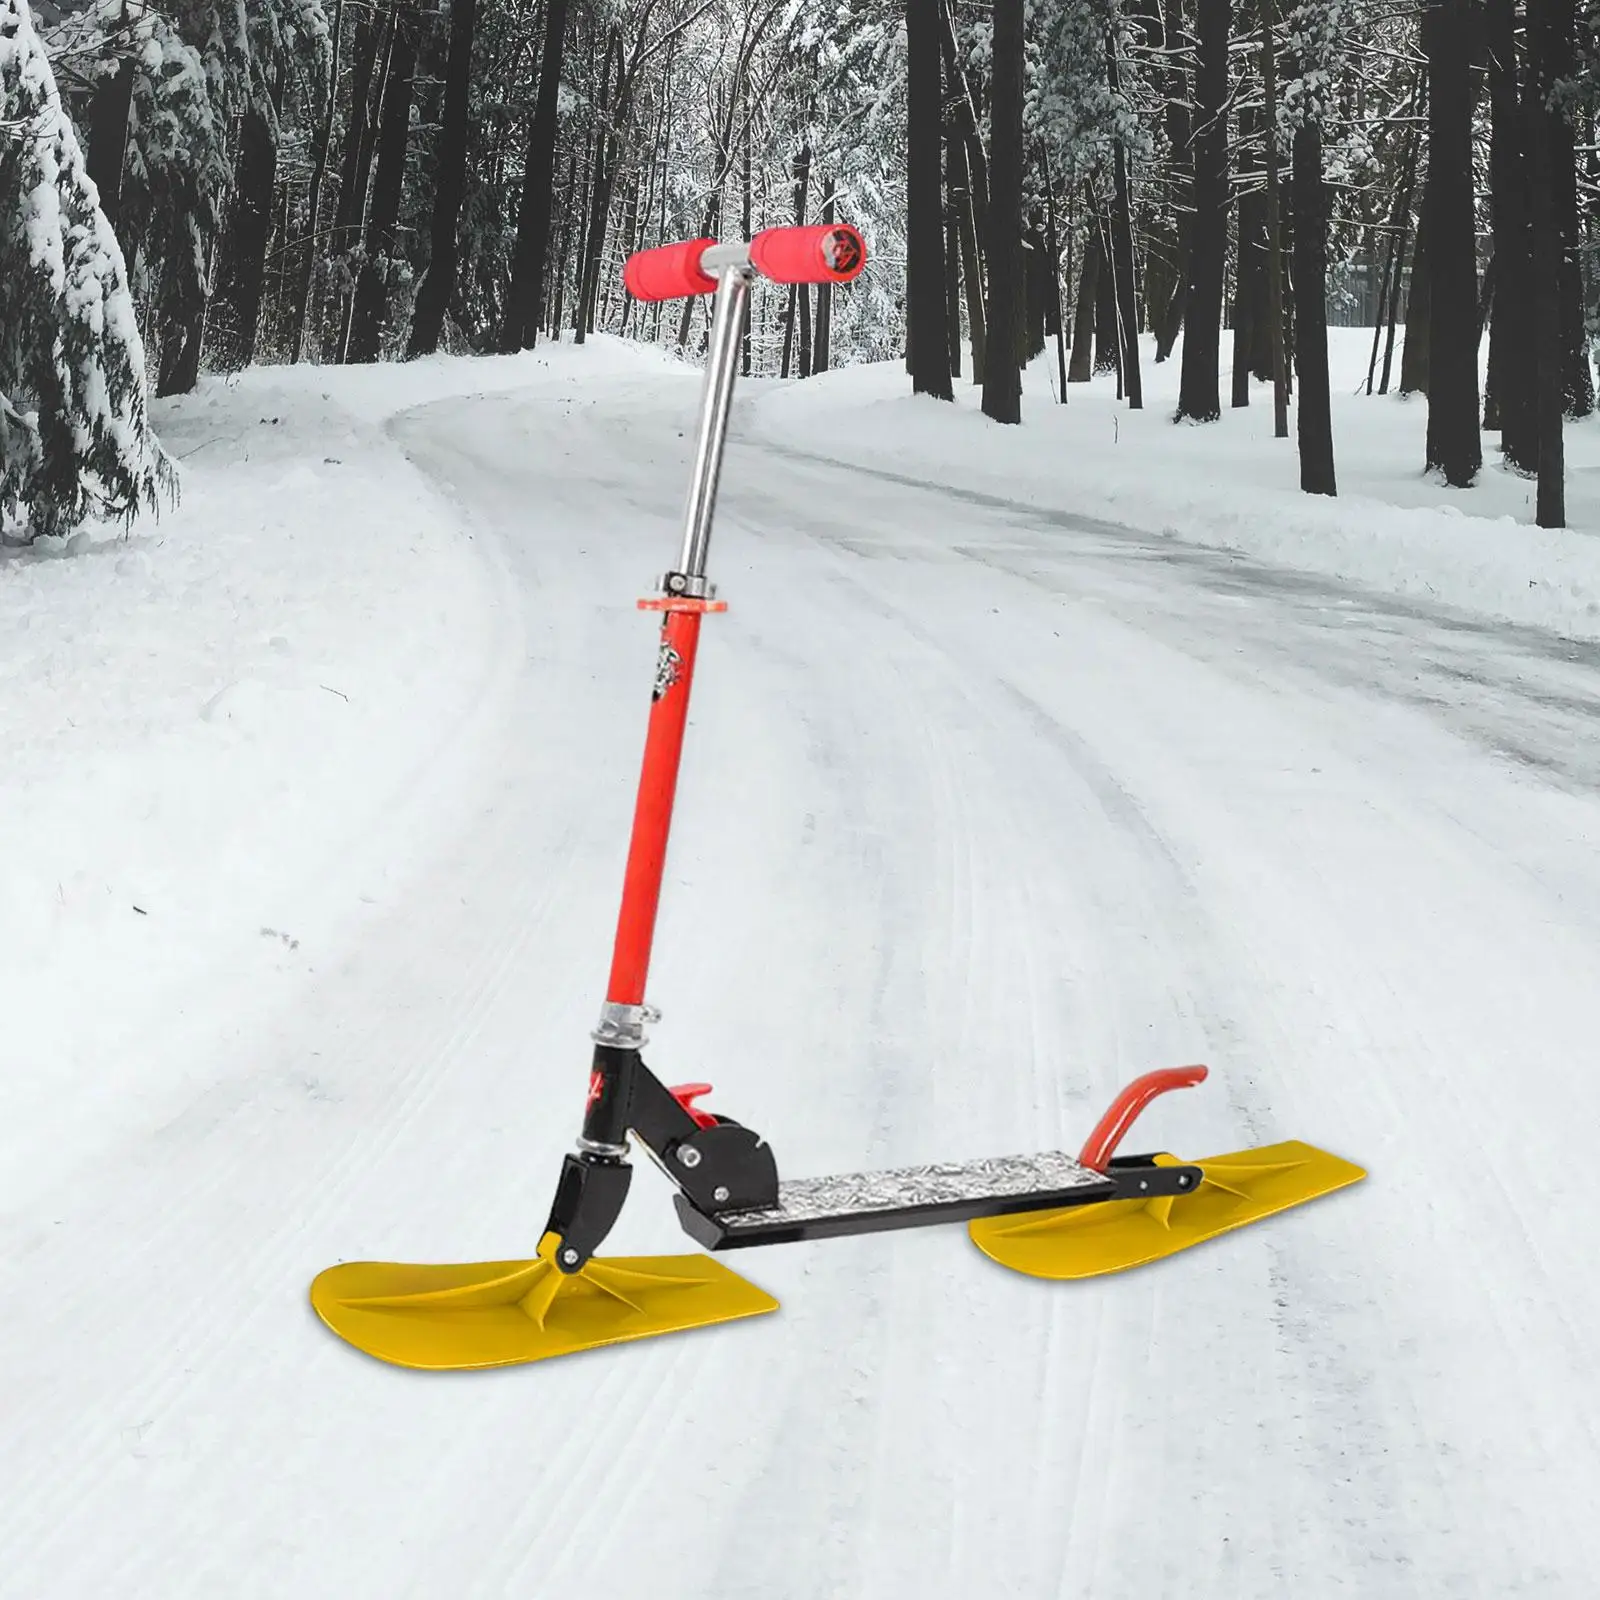 2 Pieces Snow Scooter Sled Board Durable Universal Multifunctional Ski Board Sleigh for Skiing Outdoor Training Game Toys Winter